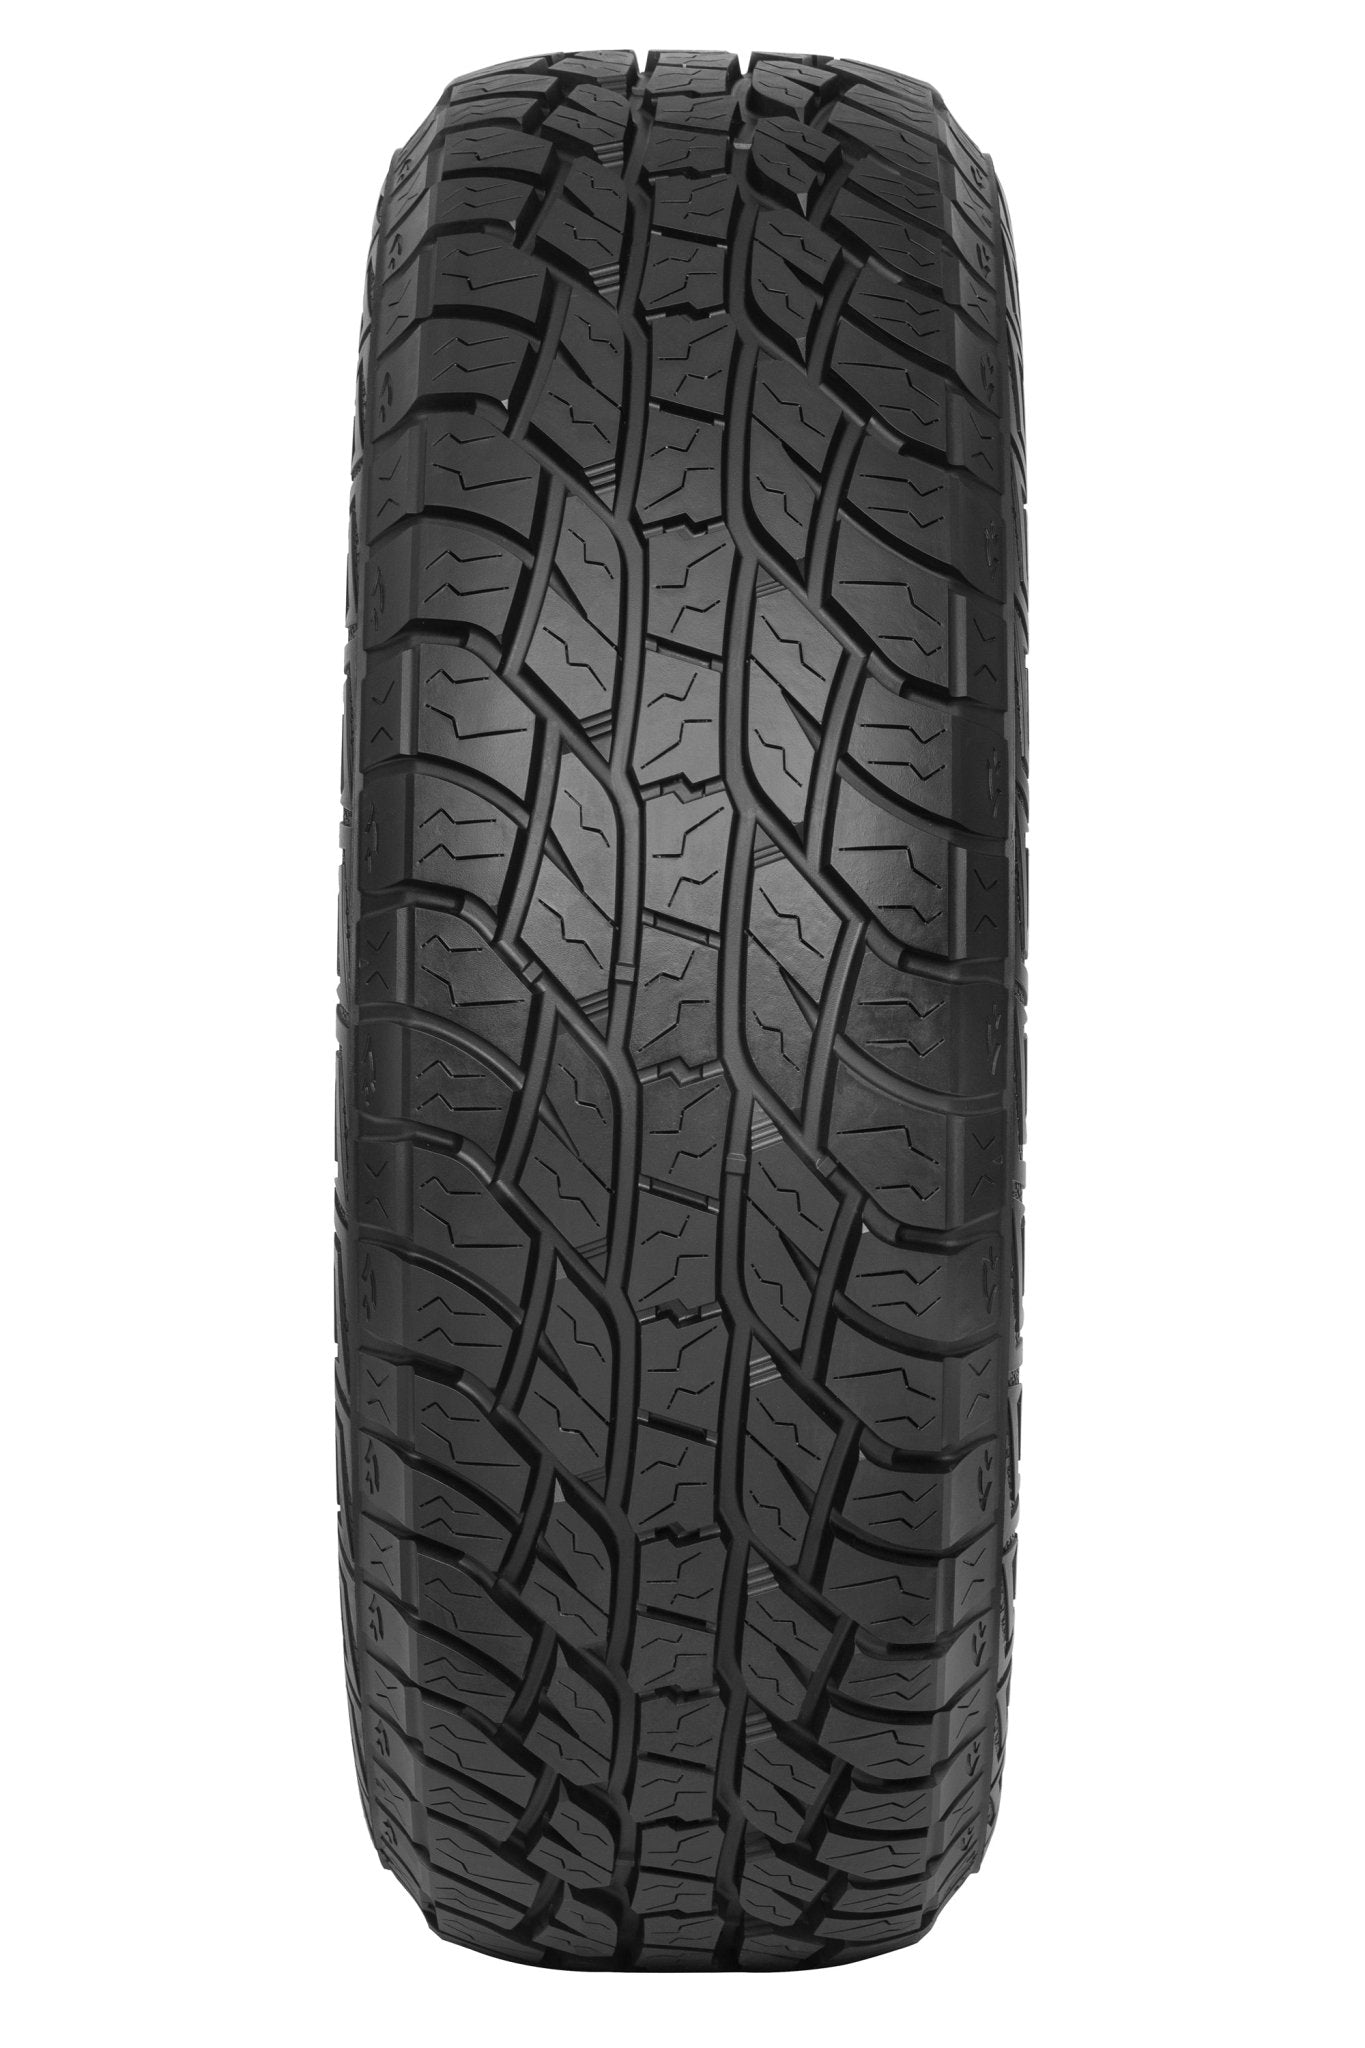 265/75R16 GRENLANDER MAGA A/T TWO LIGHT TRUCK - Toee Tire